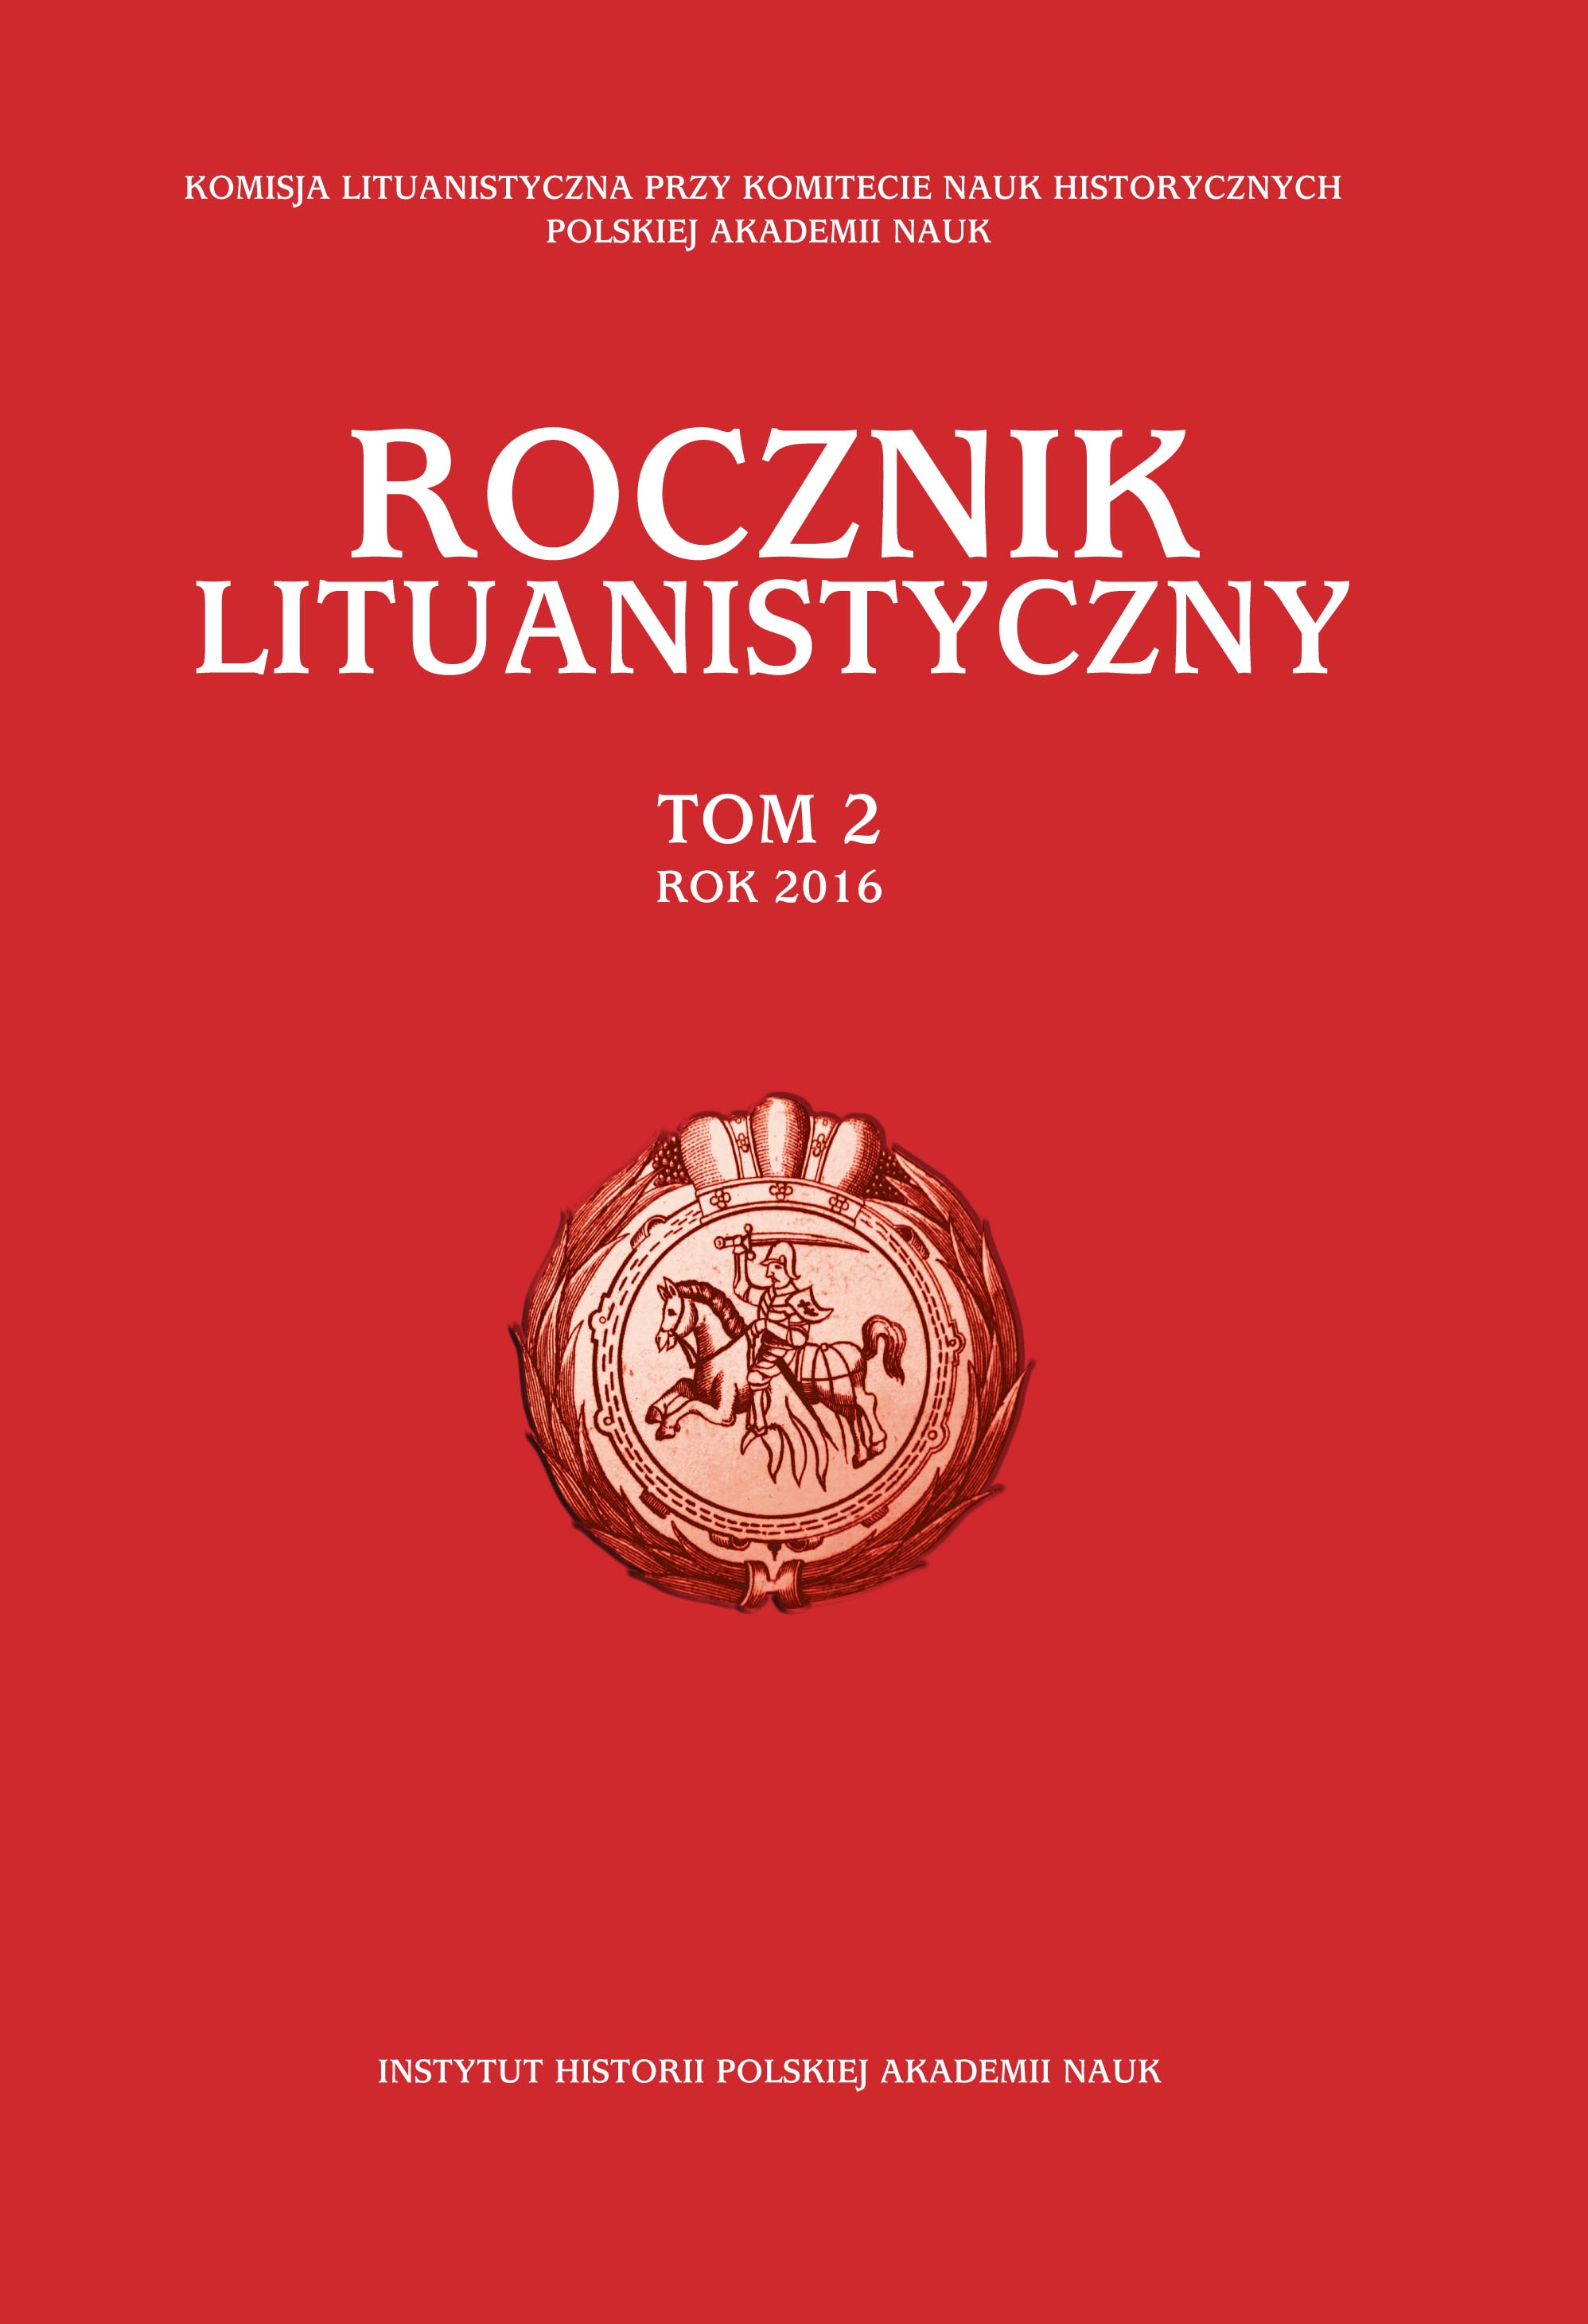 The Lithuanistica Annual Cover Image